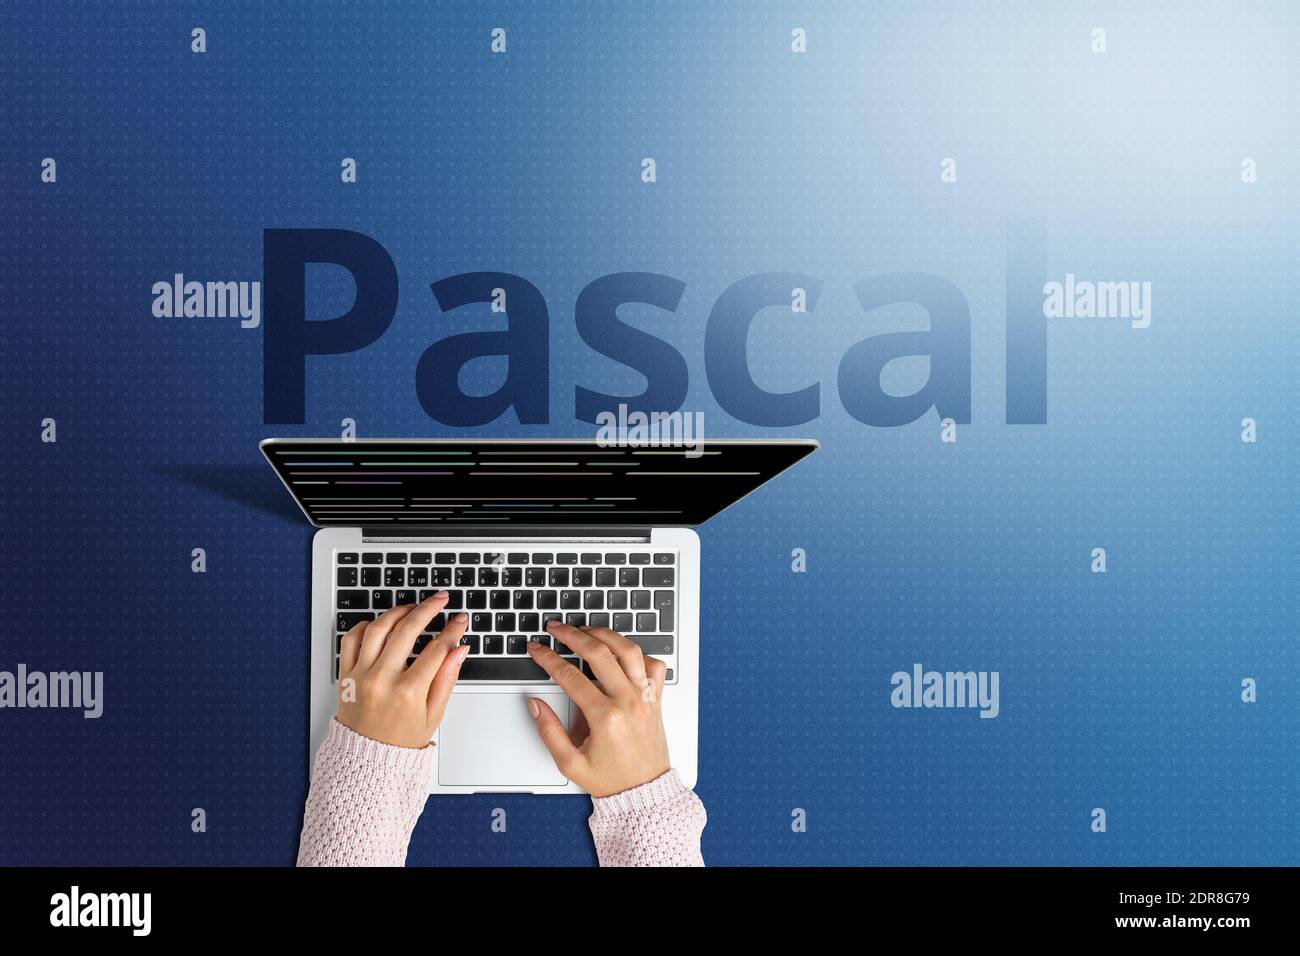 Concept of the popular pascal programming language Stock Photo - Alamy